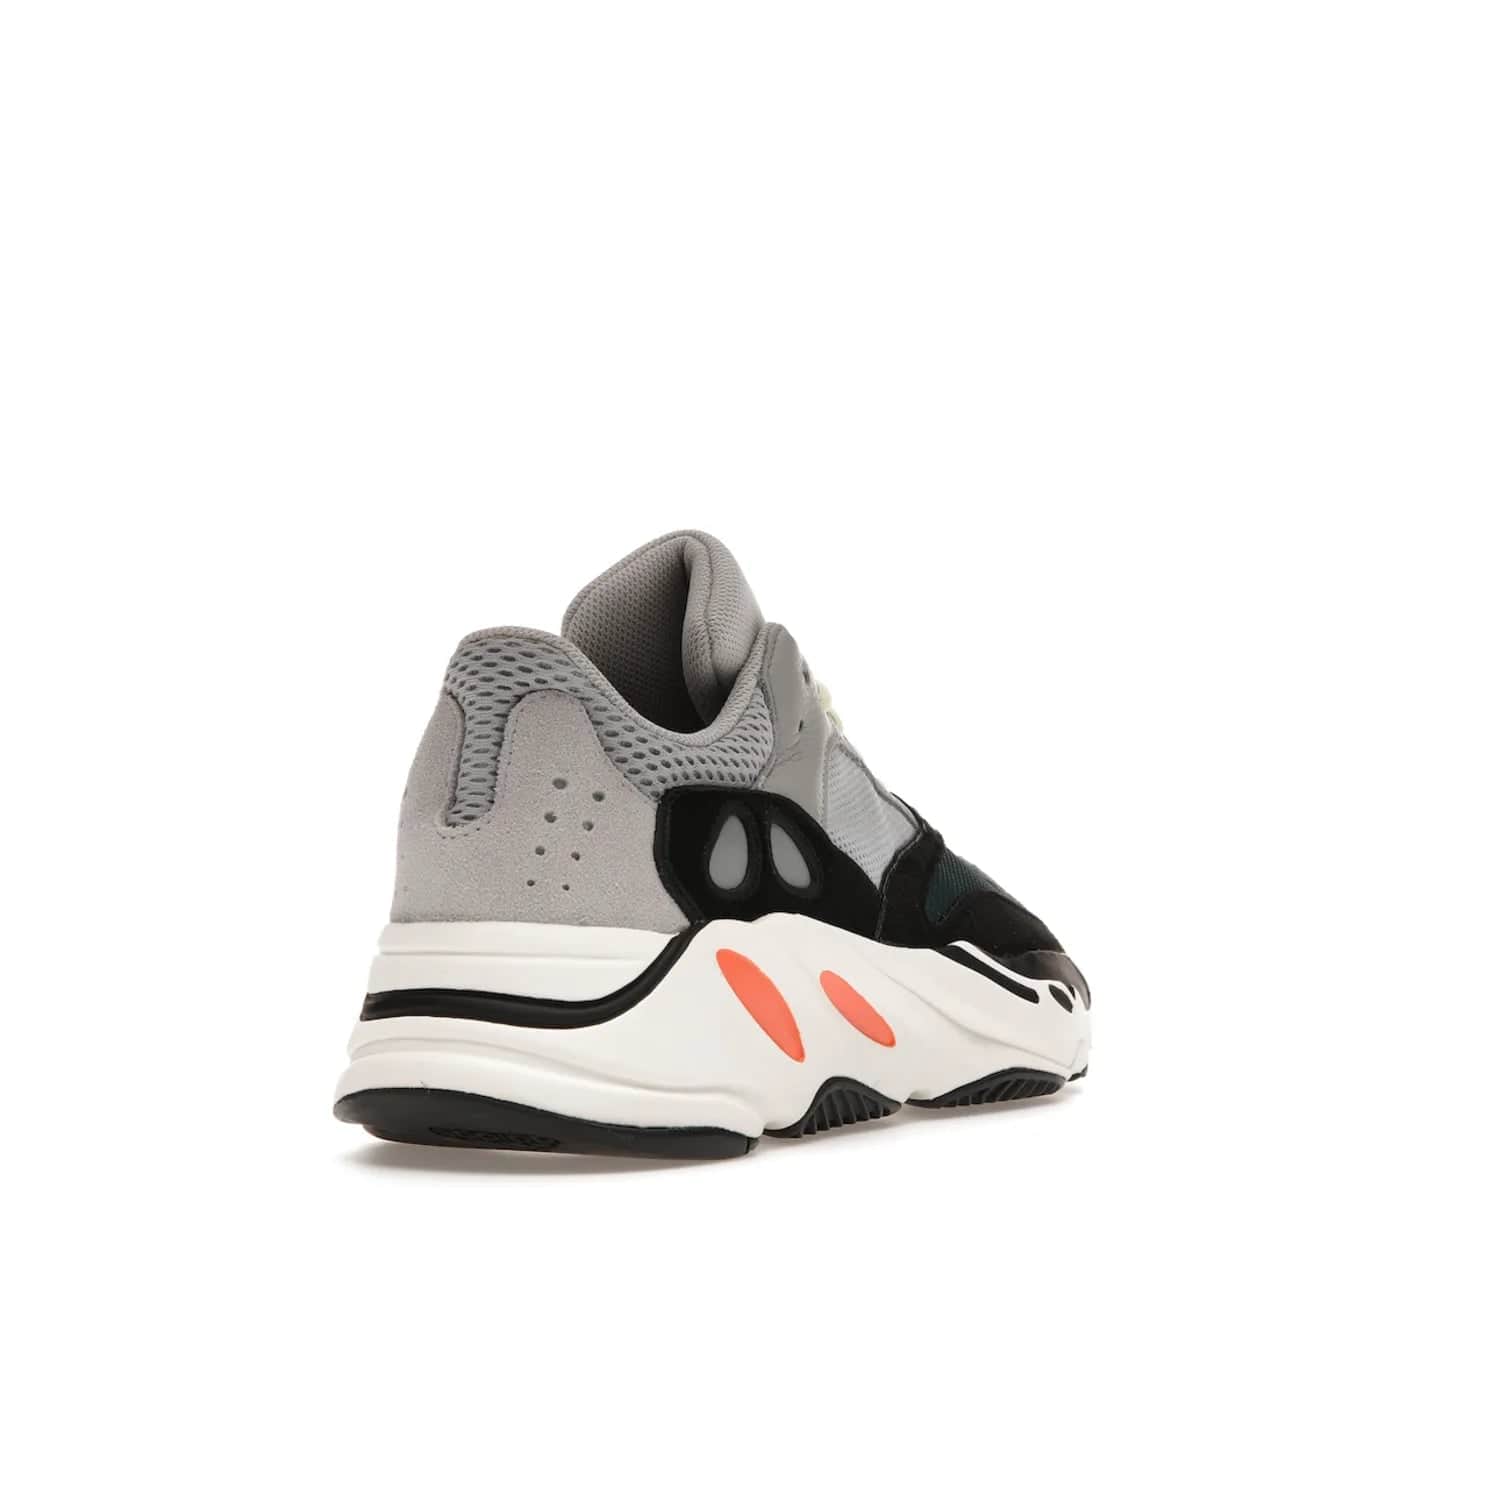 adidas Yeezy Boost 700 Wave Runner - Image 31 - Only at www.BallersClubKickz.com - Shop the iconic adidas Yeezy Boost 700 Wave Runner. Featuring grey mesh and leather upper, black suede overlays, teal mesh underlays, and signature Boost sole. Be bold & make a statement.